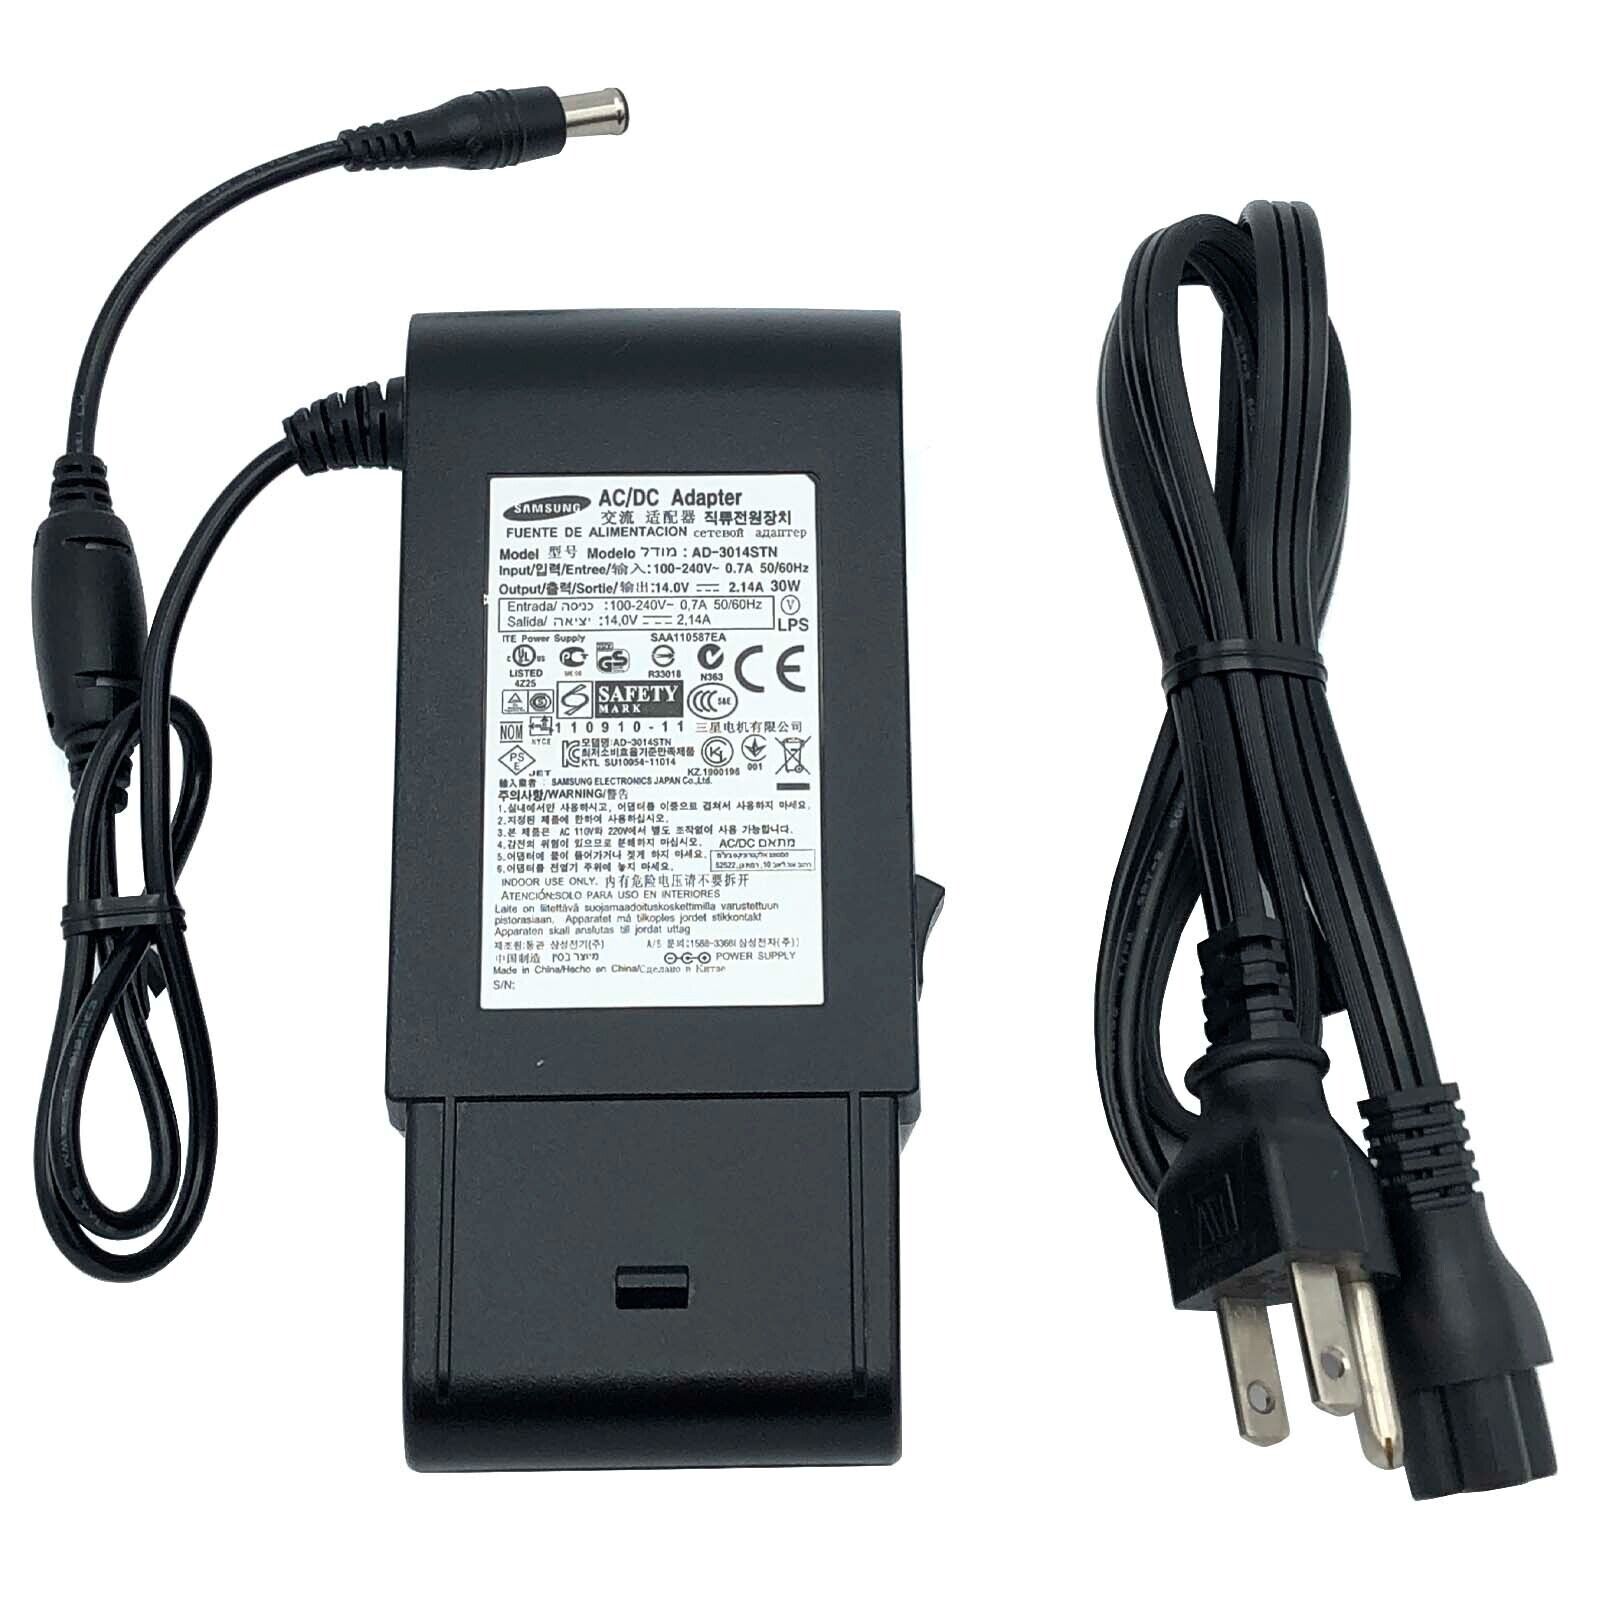 OEM Samsung Power Adapter for SyncMaster S22B350H S22B360HW S22D300NY Monitors